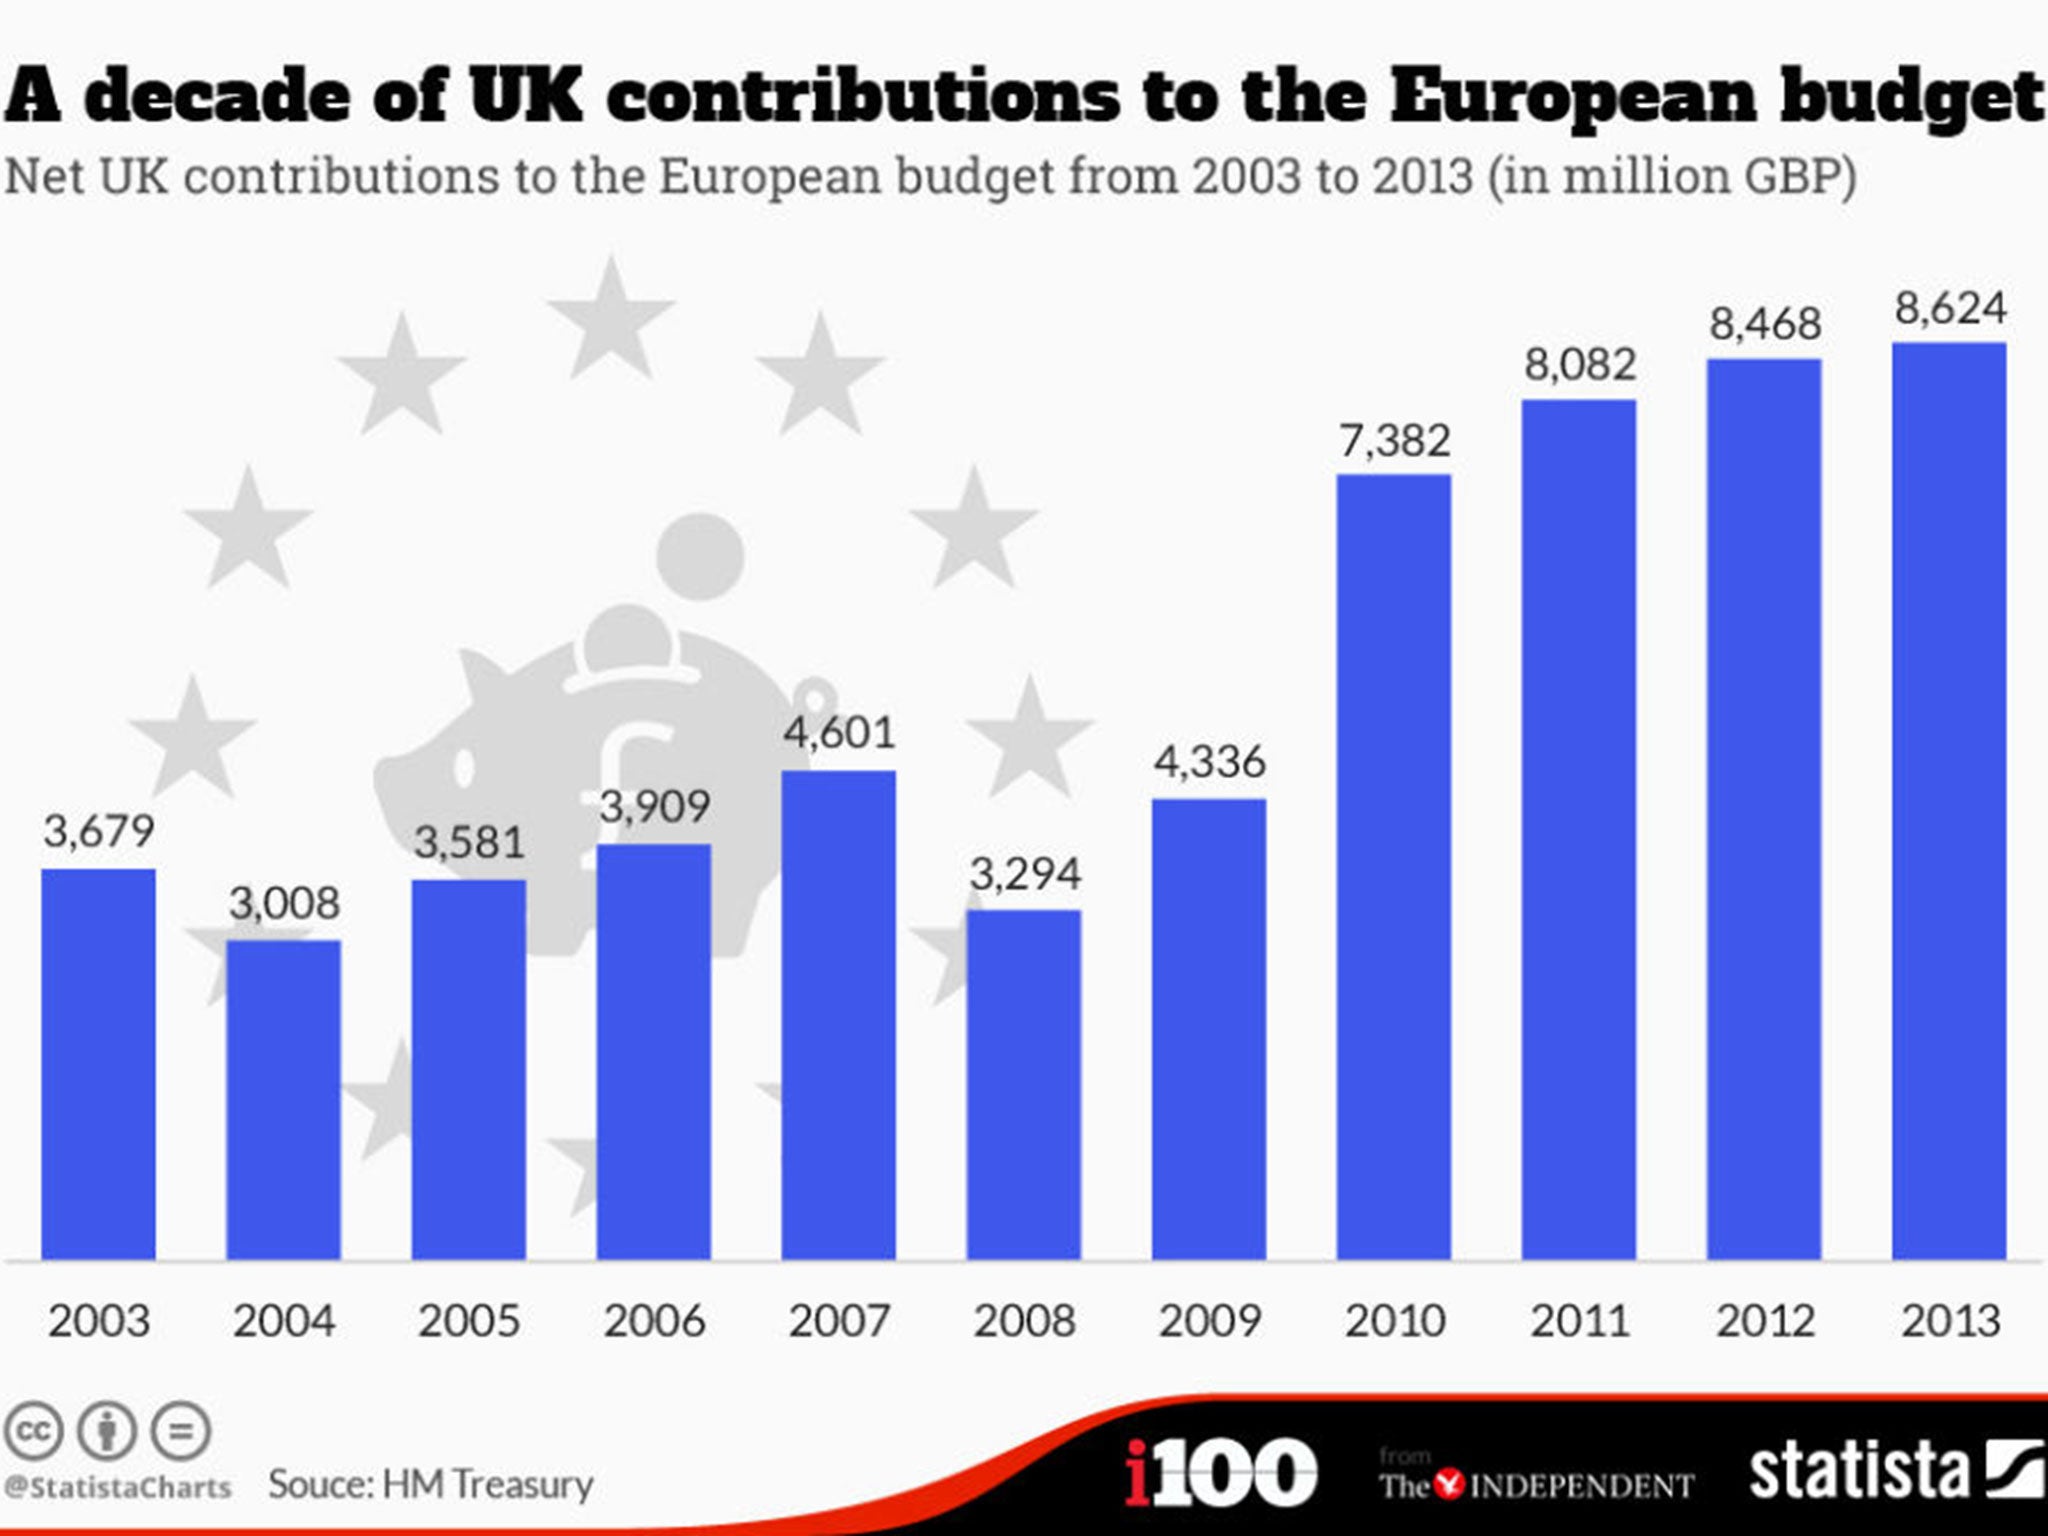 The amount the UK has contributed to the European budget over the past ten years